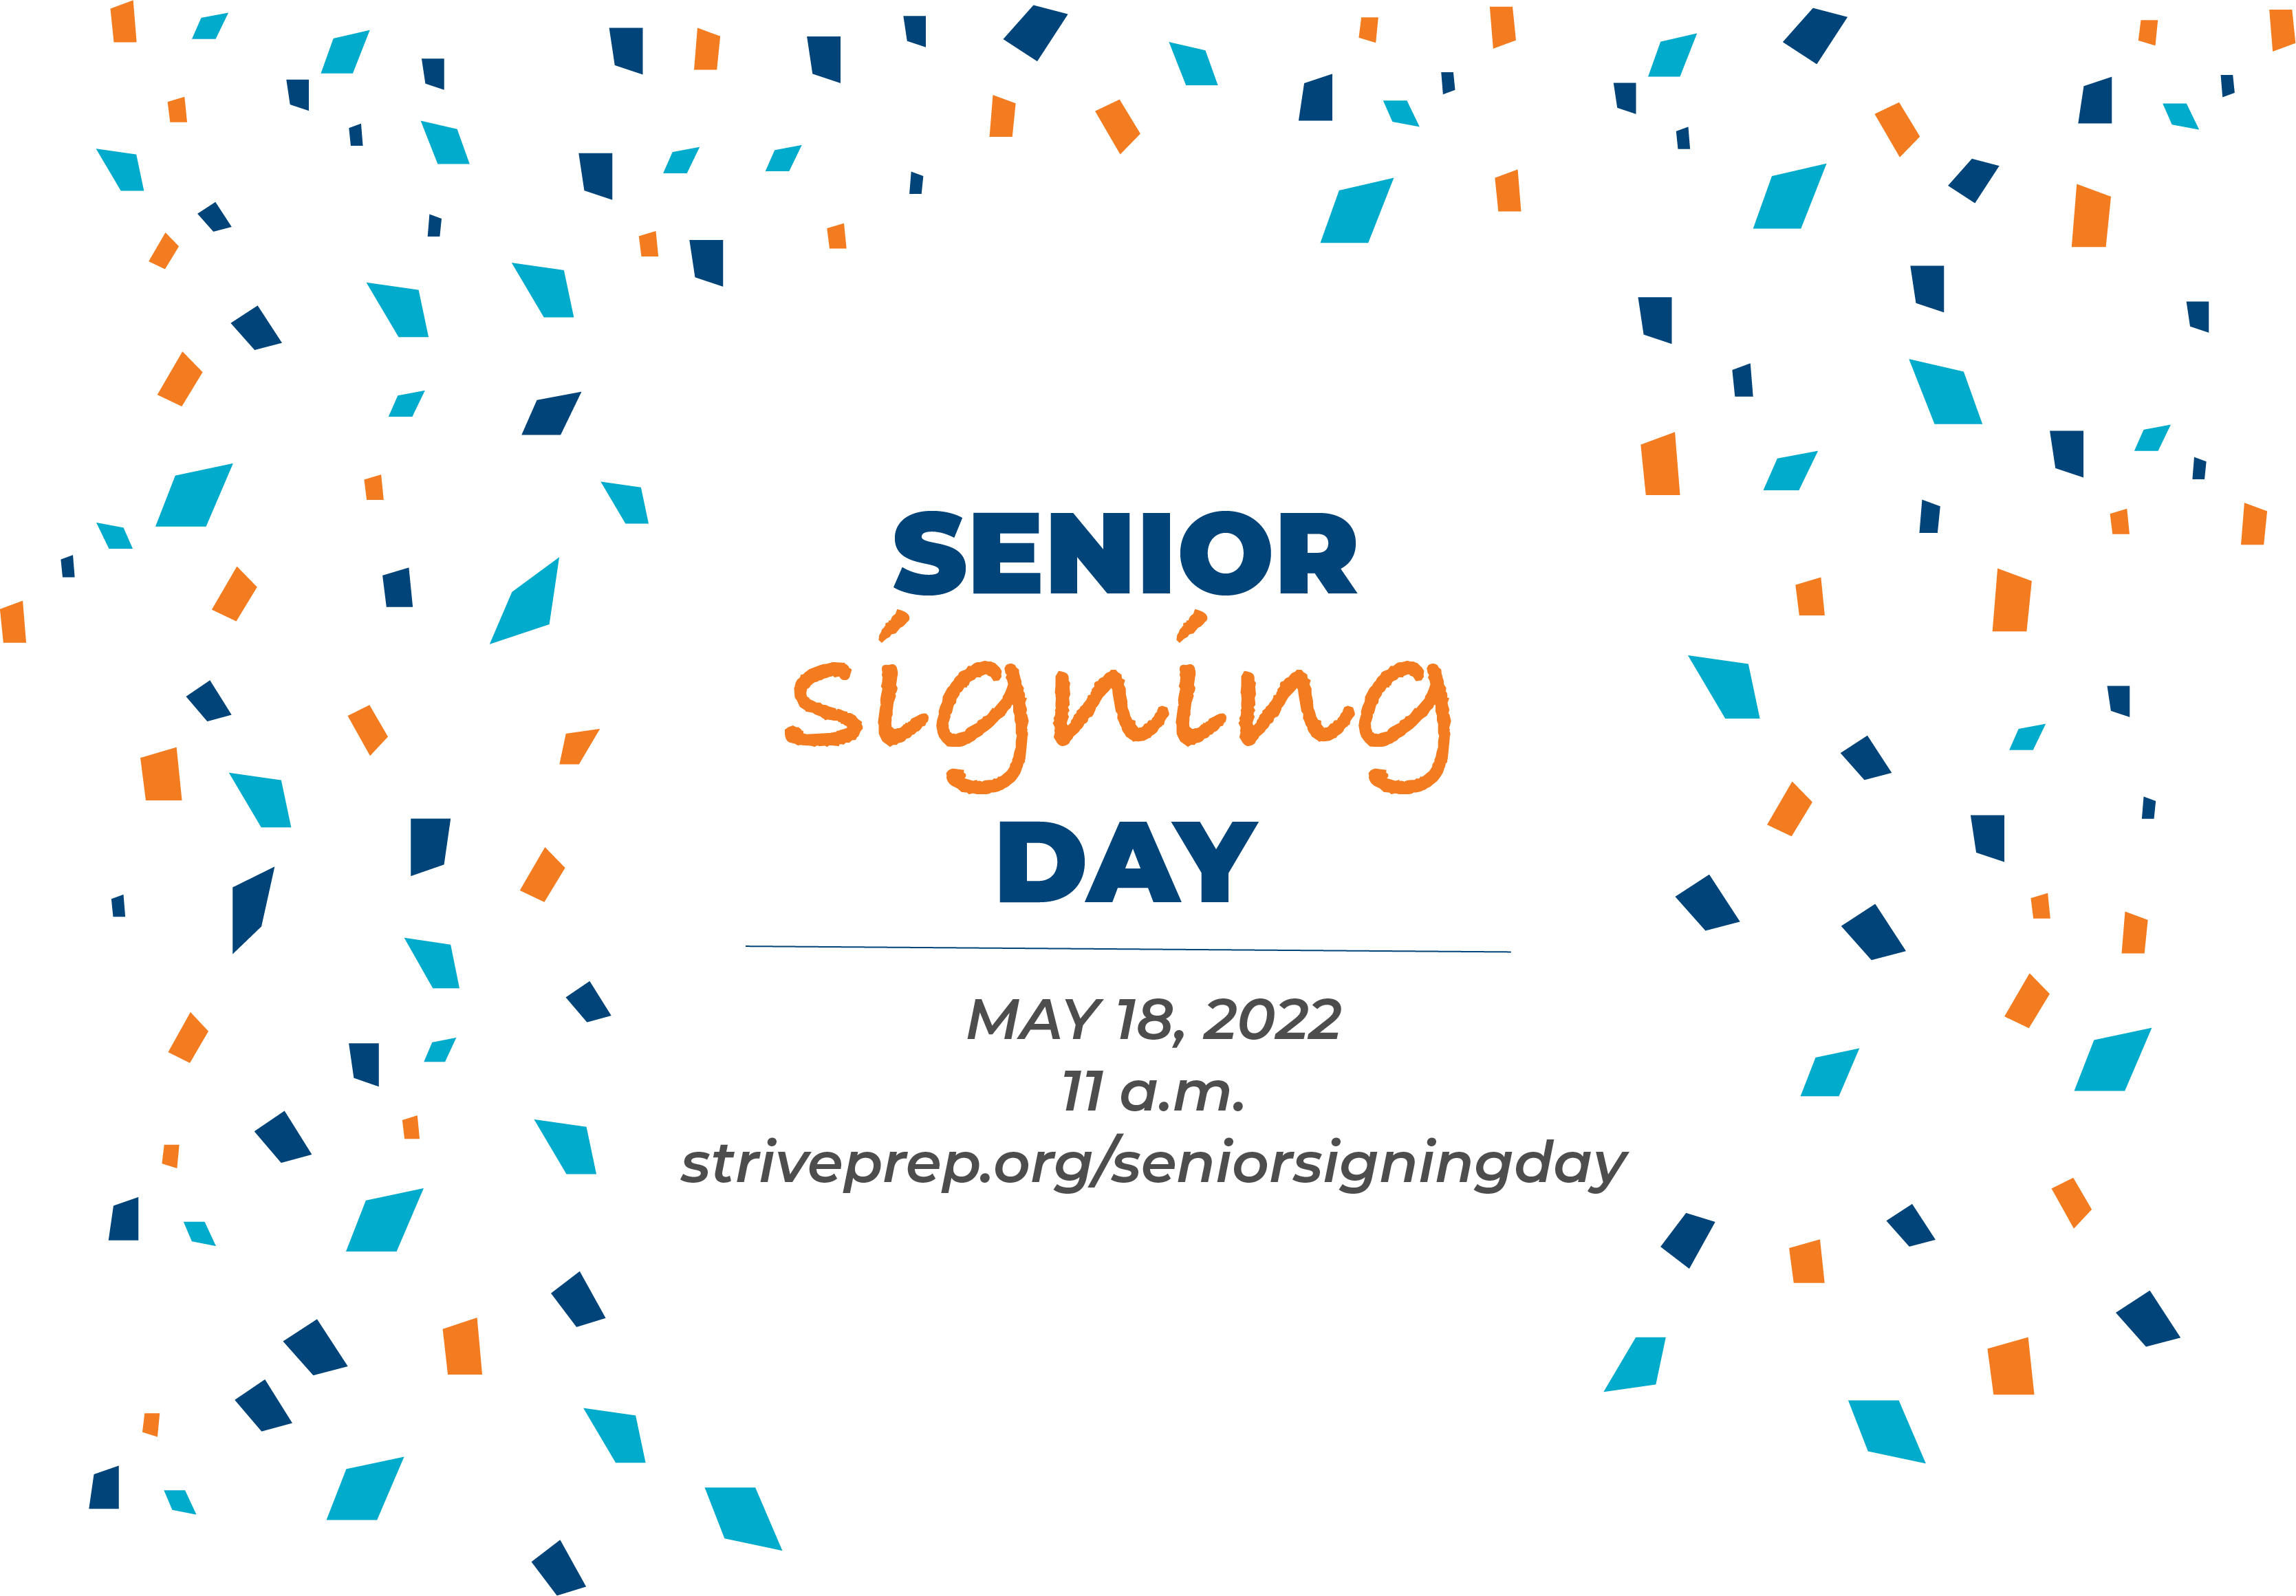 Join us May 18 for Senior Signing Day!